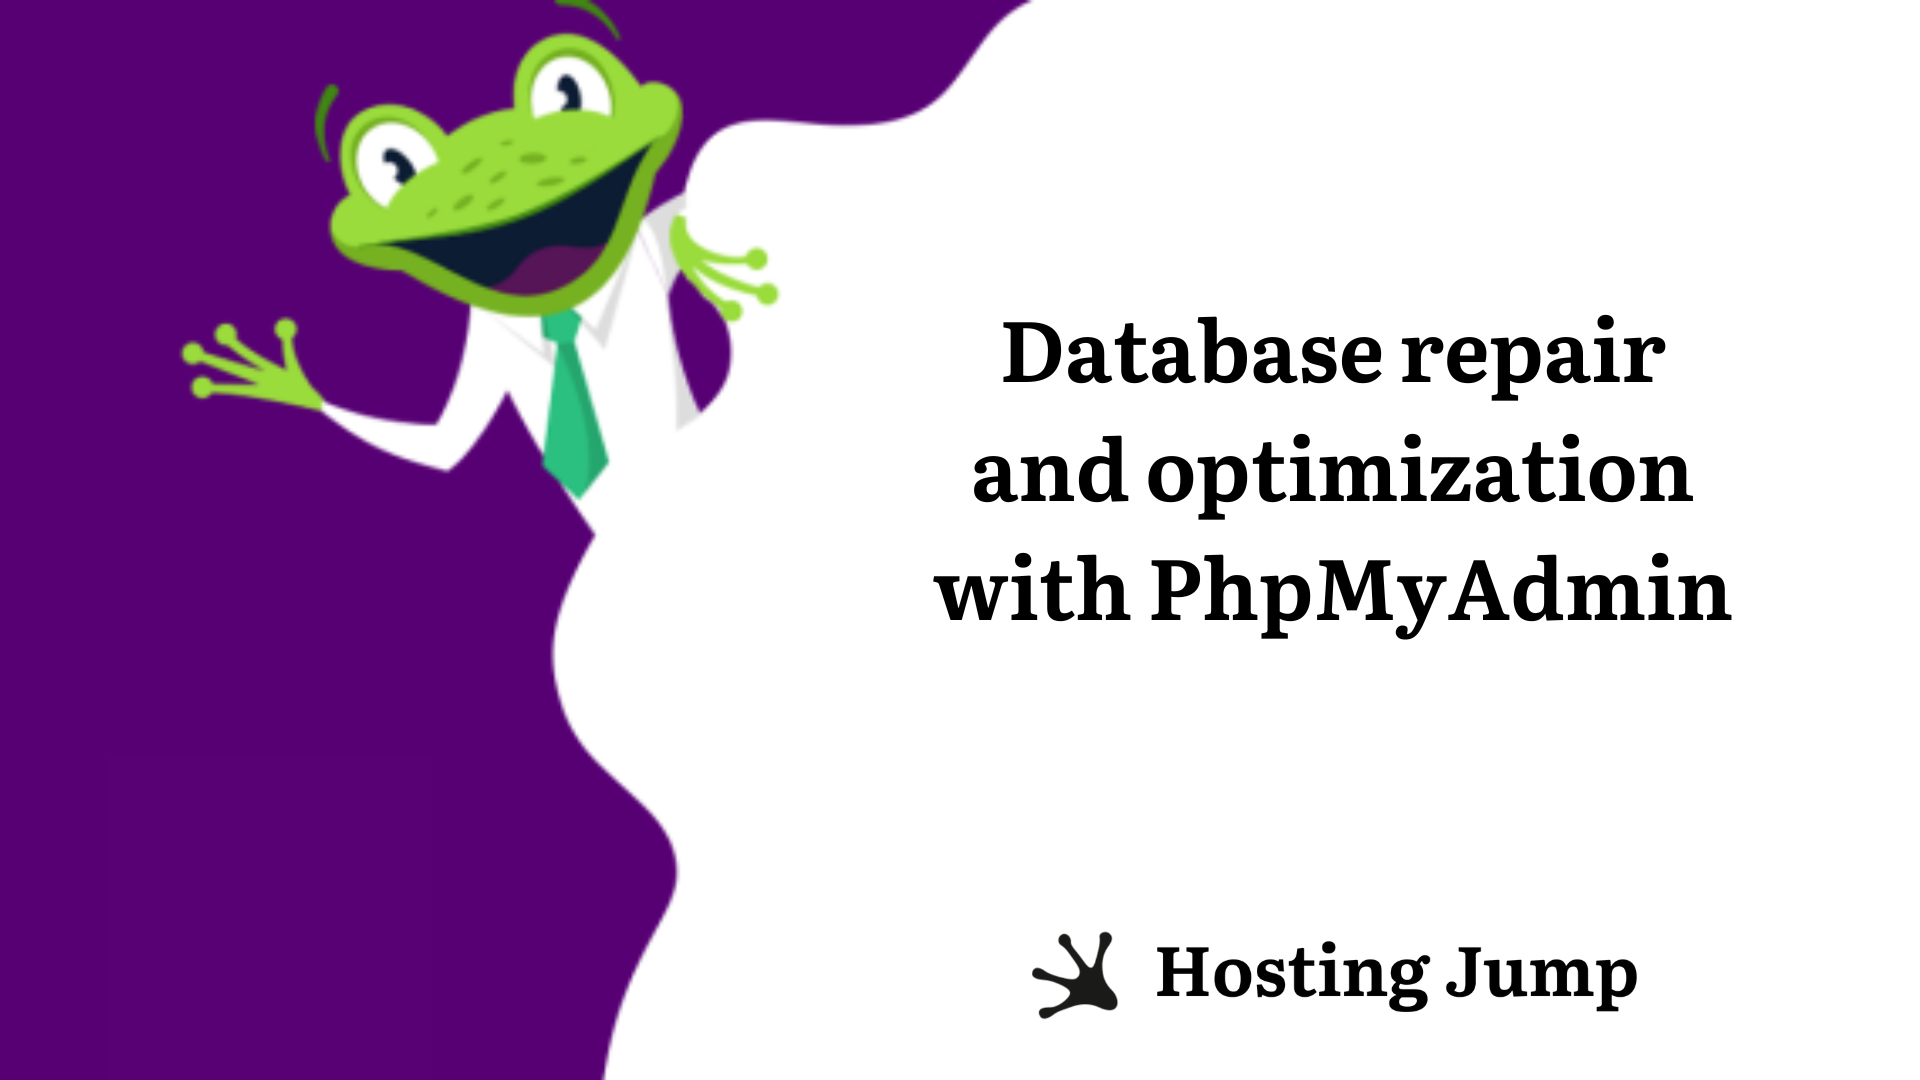 Database repair and optimization with PhpMyAdmin